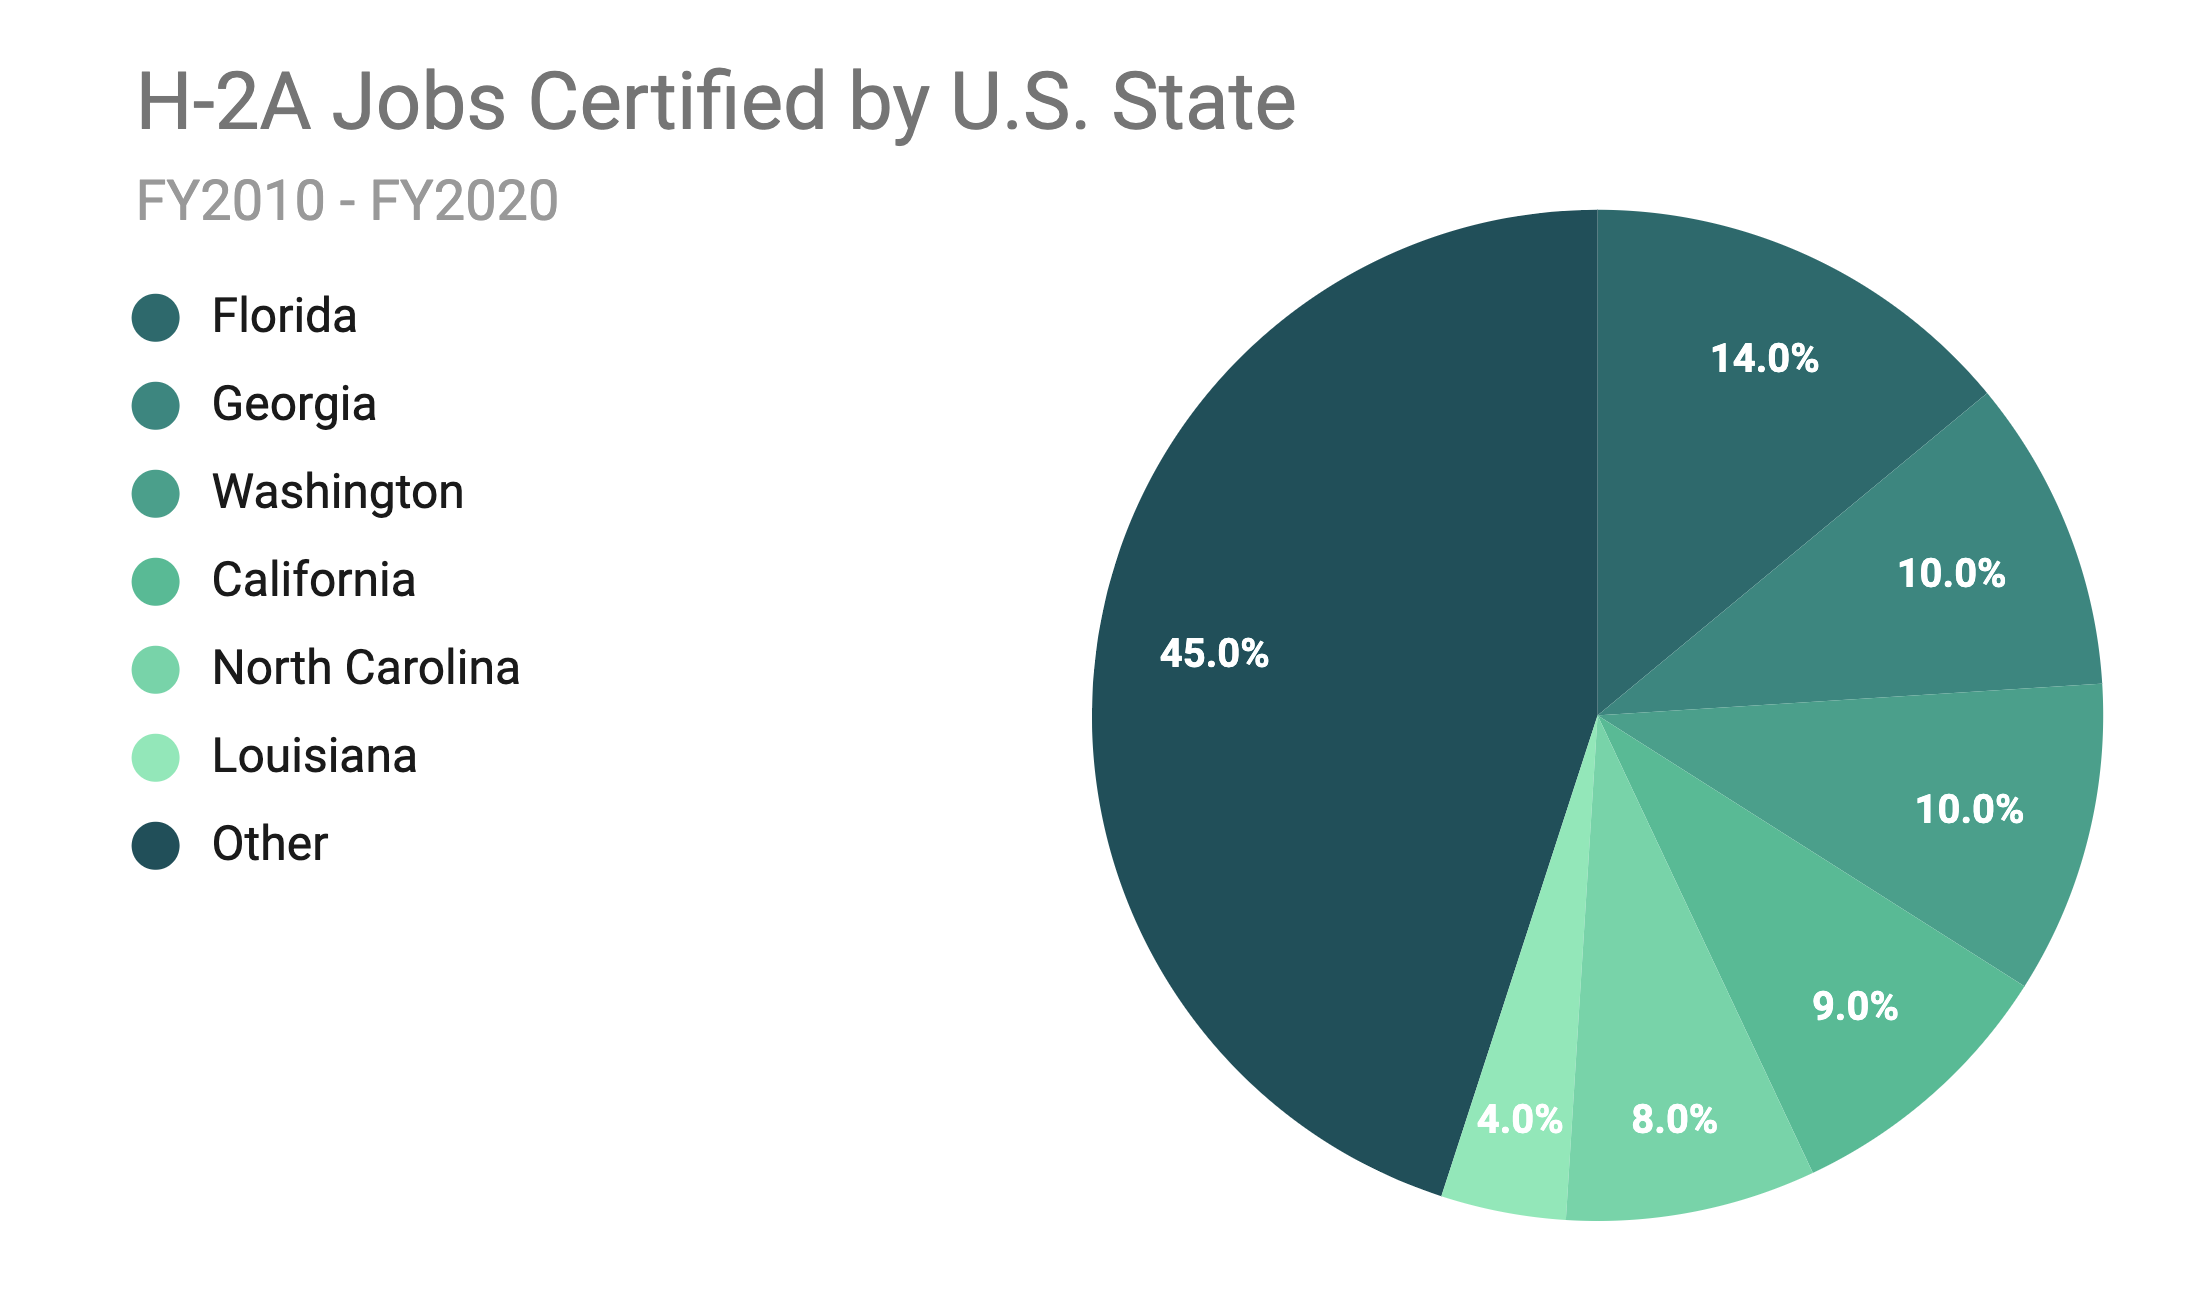 H-2A Jobs Certified by U.S. State FY2010 - FY2020